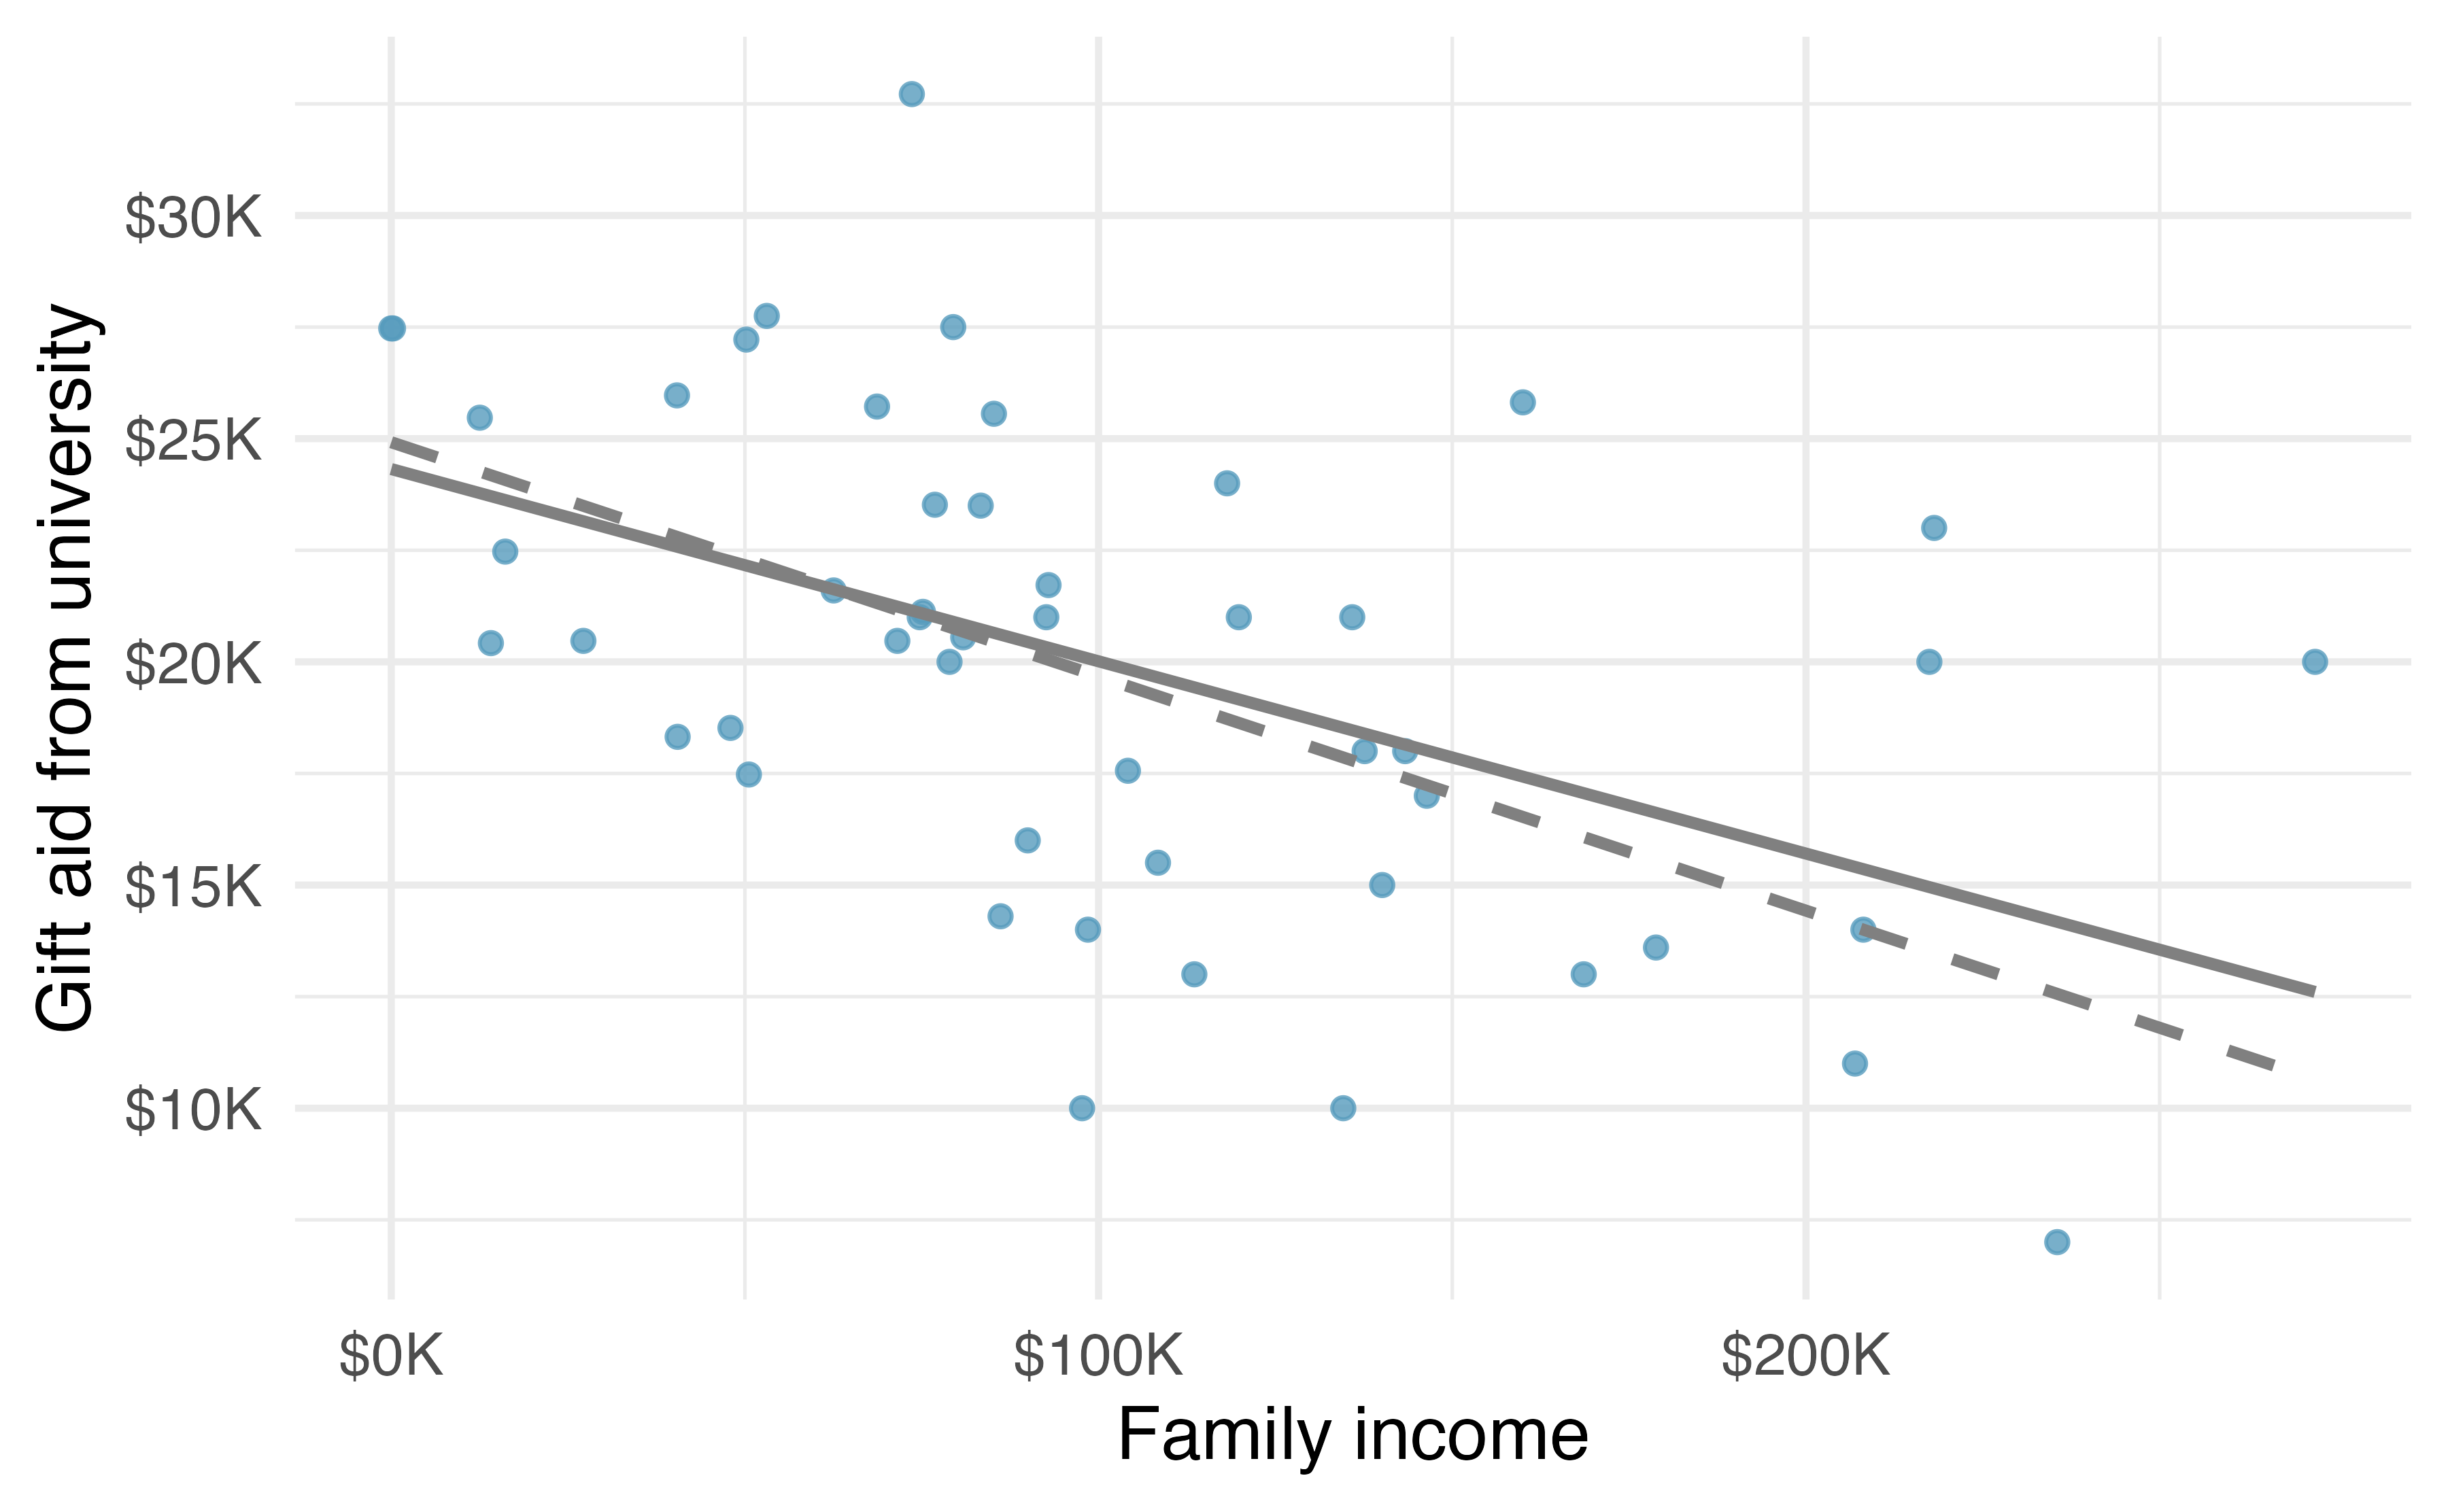 Scatterplot with family income on the x-axis and gift aid on the y-axis.  The relationship is moderate negative and linear.  Two lines are superimposed on the scatterplot.  One line is fit to the data by minimizing the sum of squared residuals, i.e., the least squares line.  The other line is fit to the data by minimizing the sum of the abolute value of the residuals.